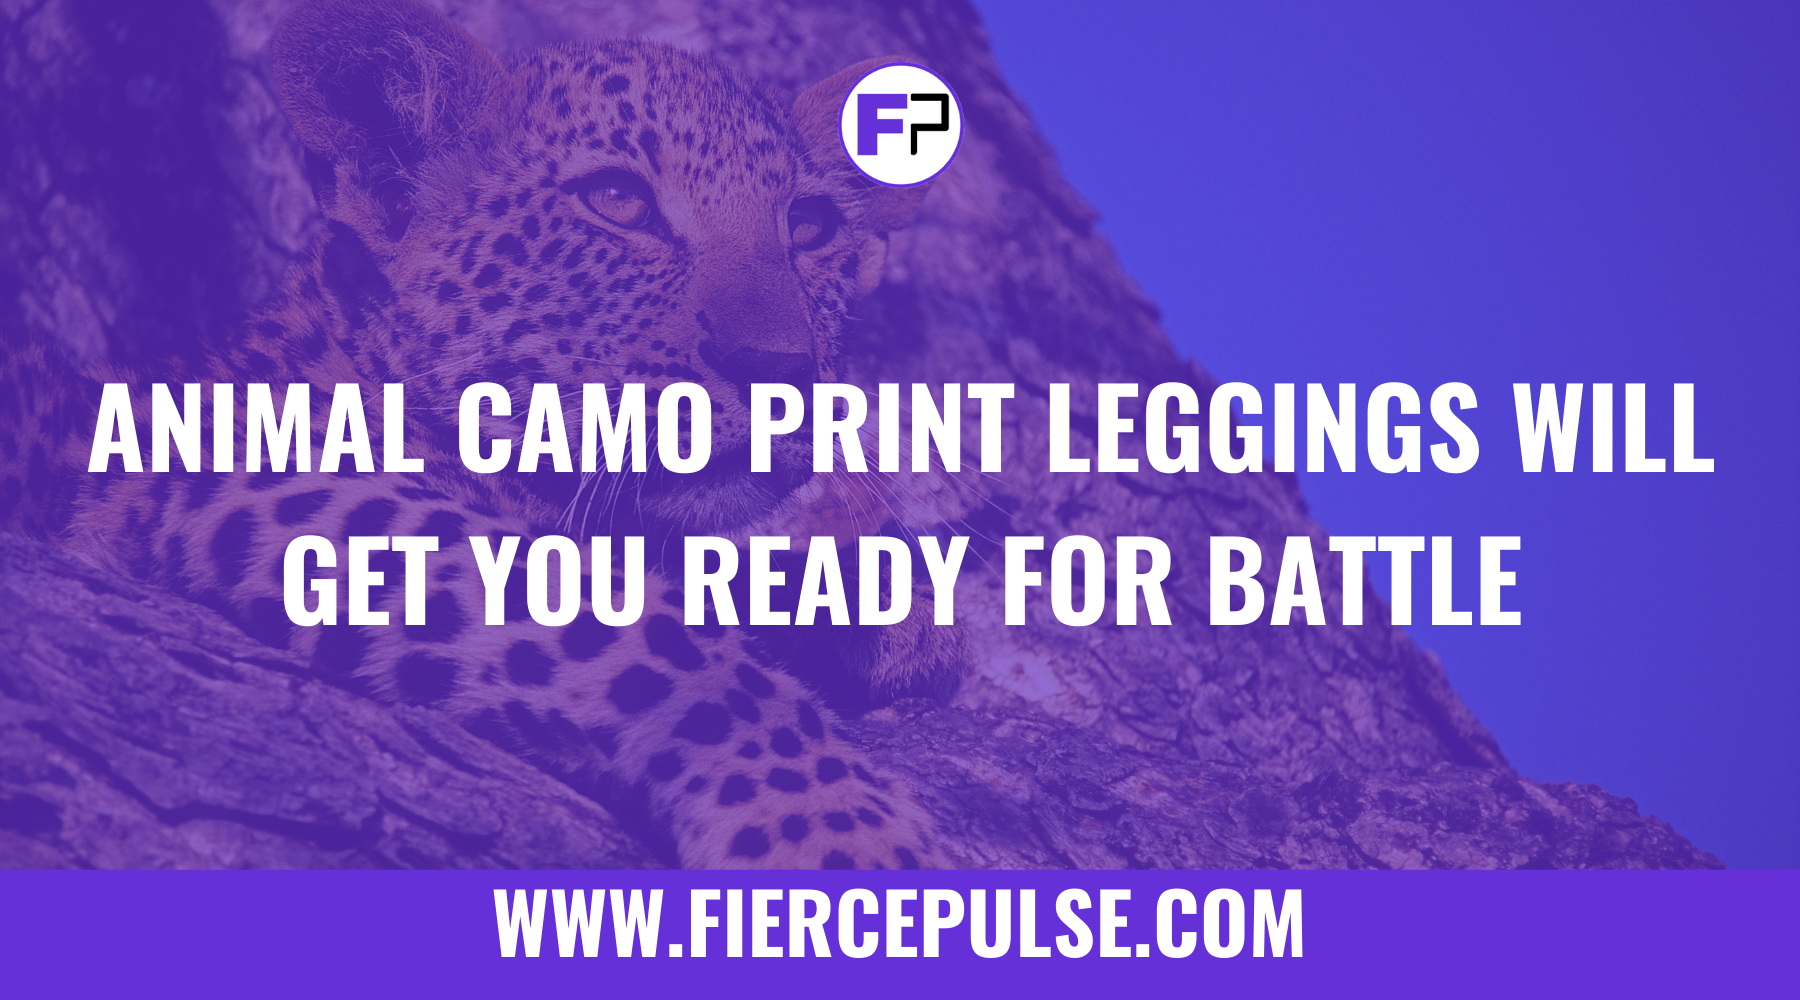 Animal Camo Print Leggings Will Get You Ready for Battle